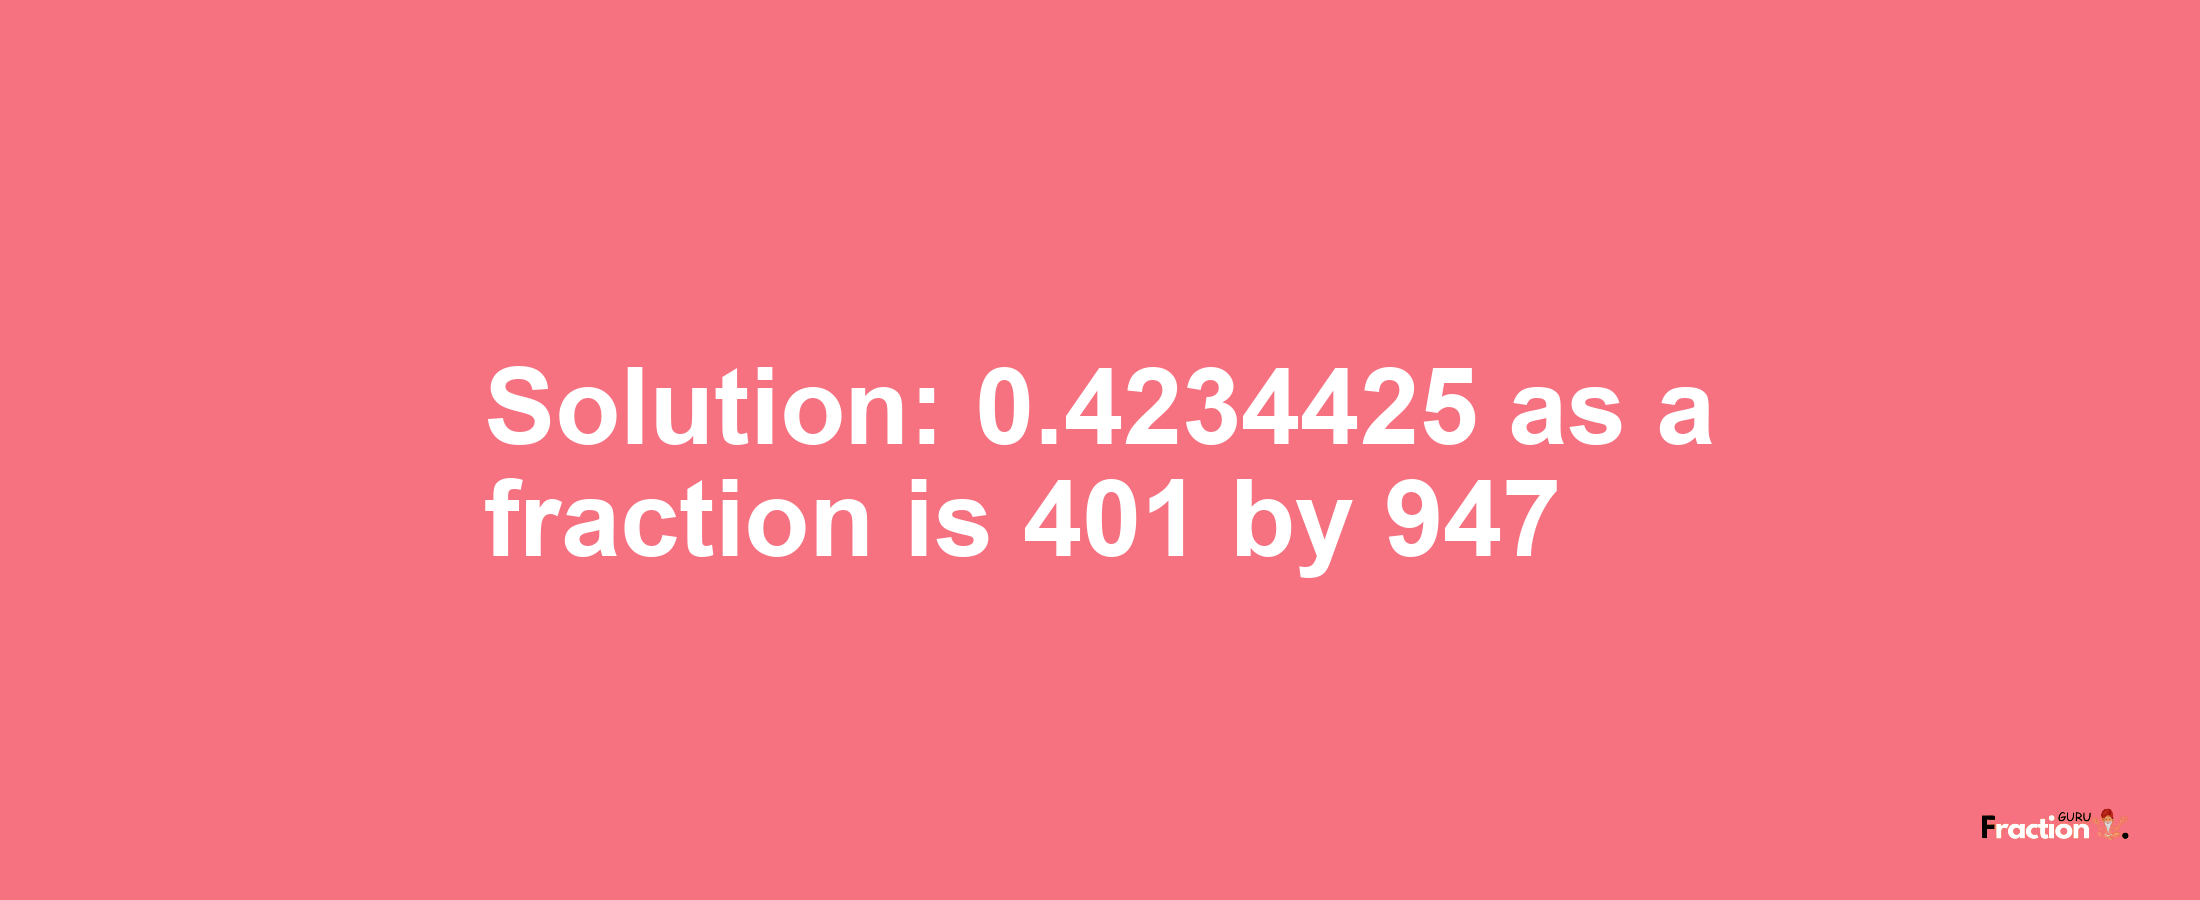 Solution:0.4234425 as a fraction is 401/947